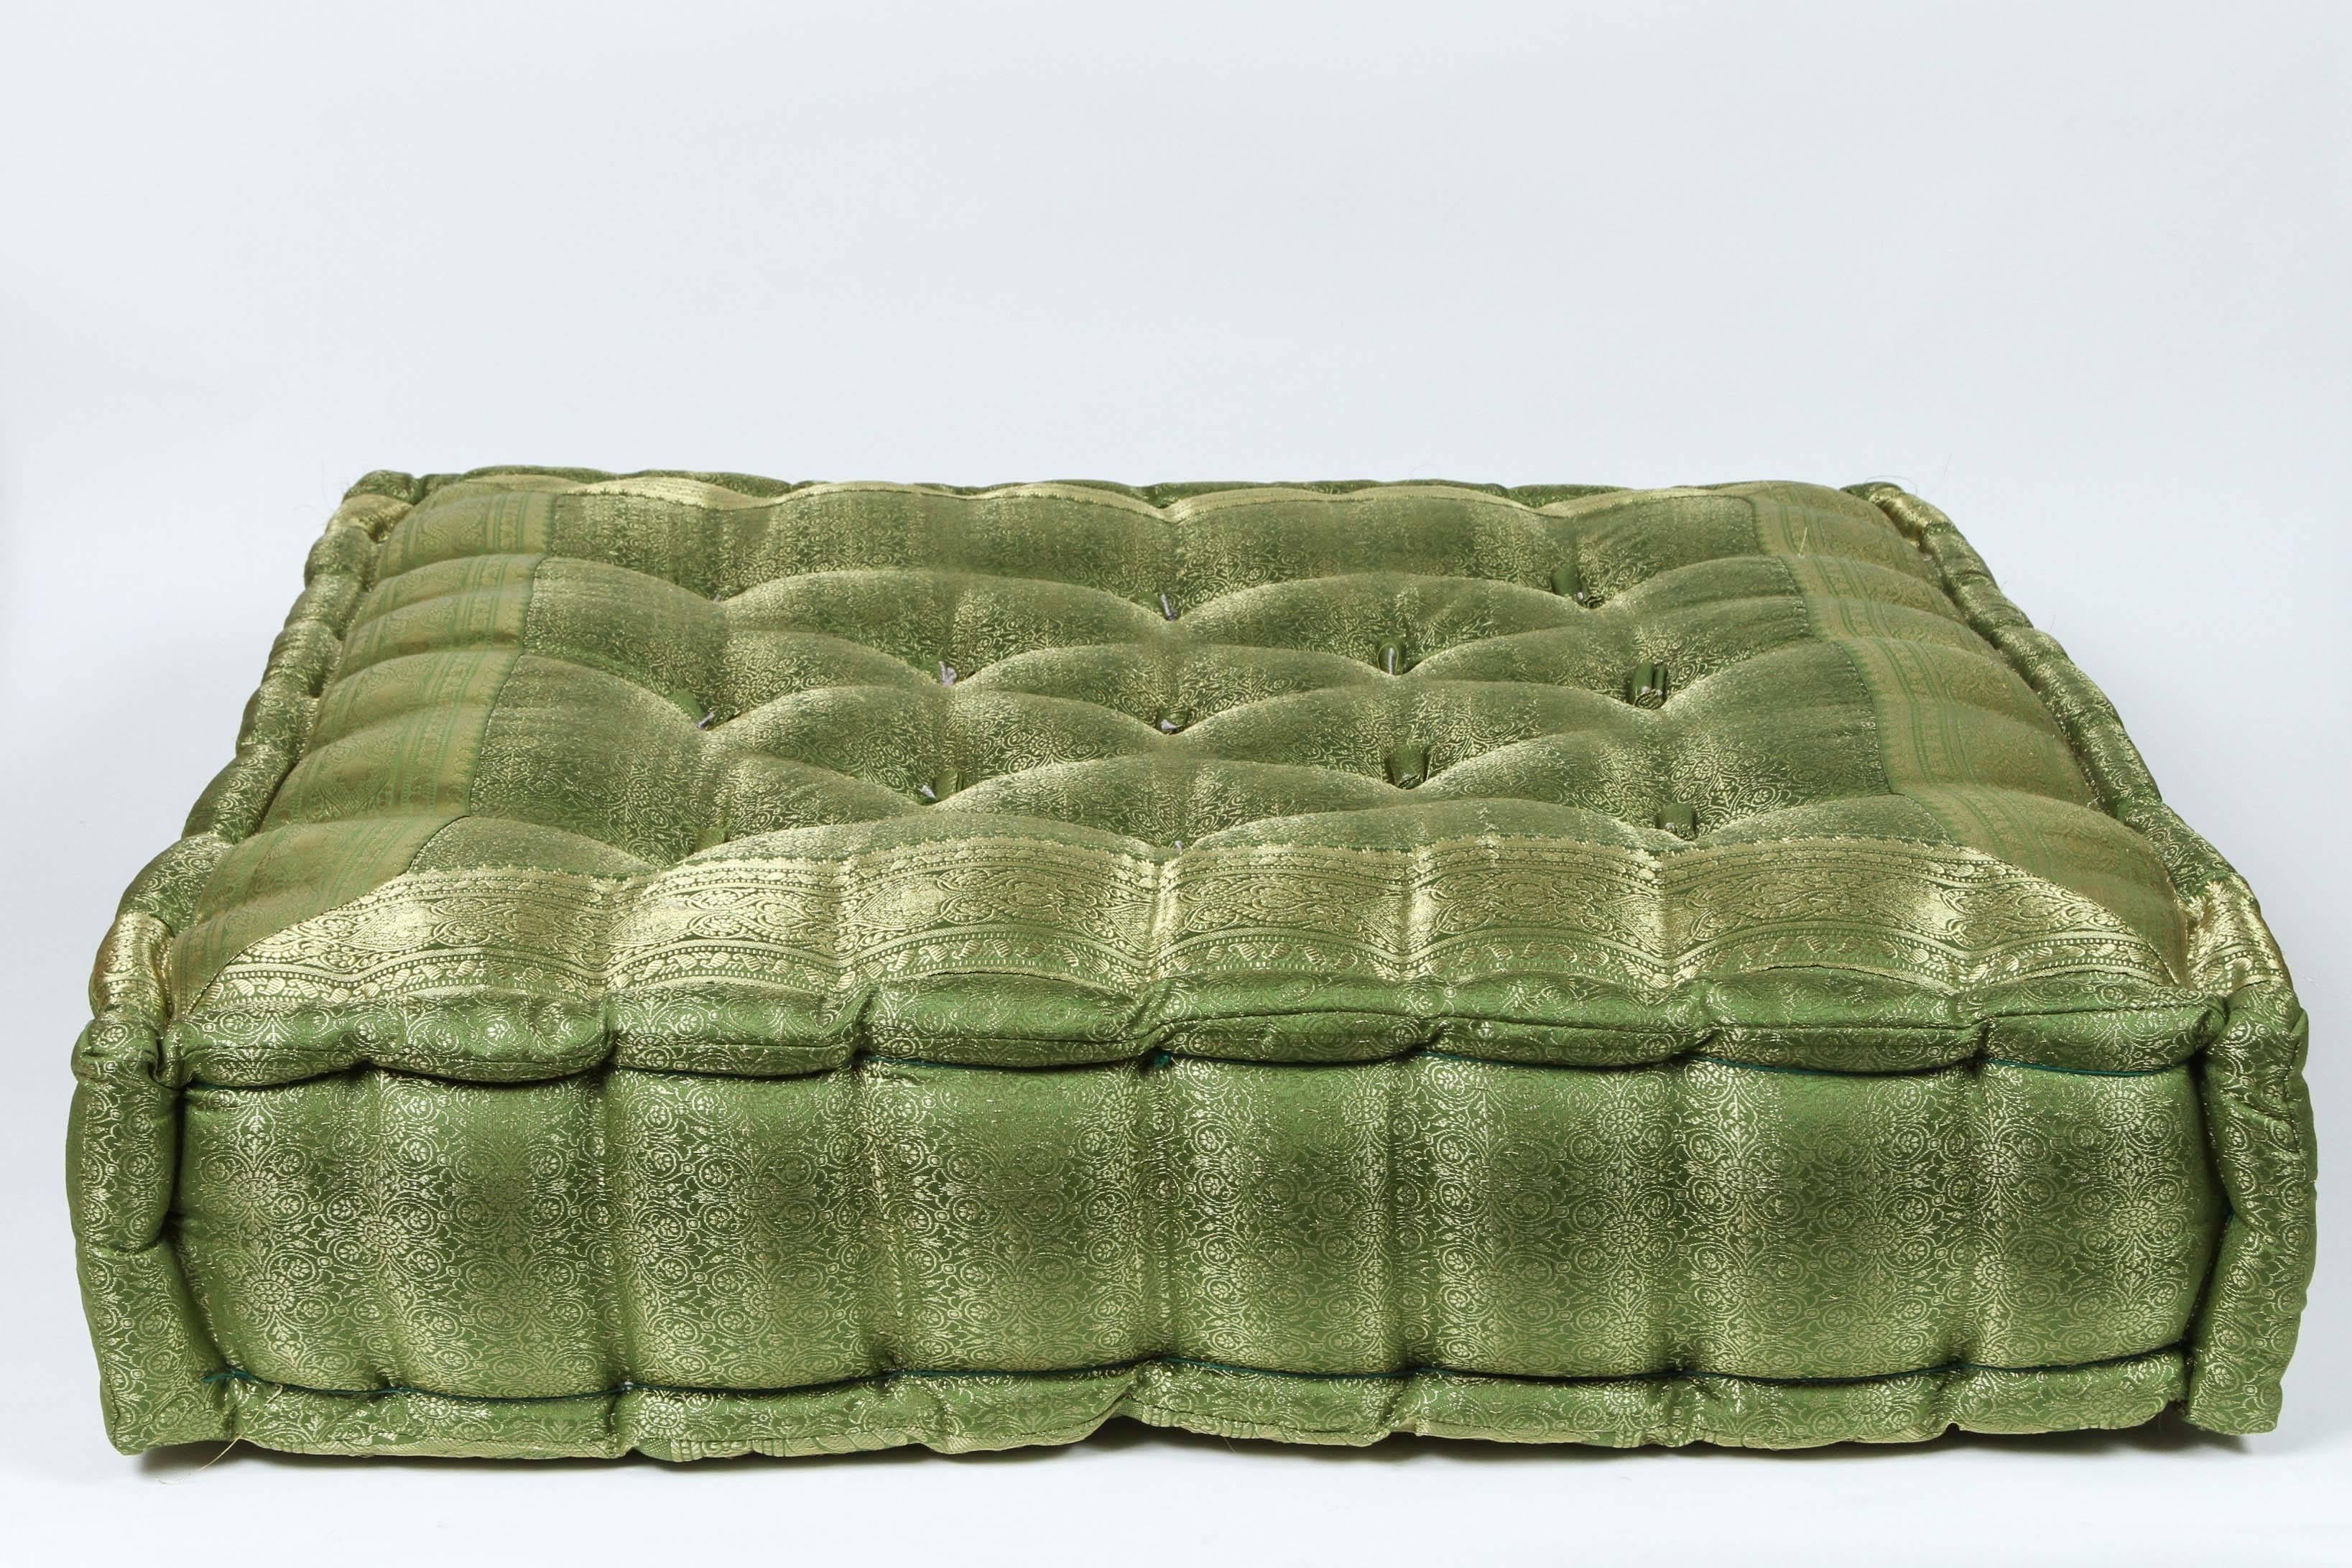 Oversized silk square green tufted floor pillow cushion.
Handcrafted from silk sari fabric, these floor seat cushions are great to use in kids room or around your yoga Bohemian or Moroccan room or for your pet.
Mah Jong style hand-sewn rolled edge,